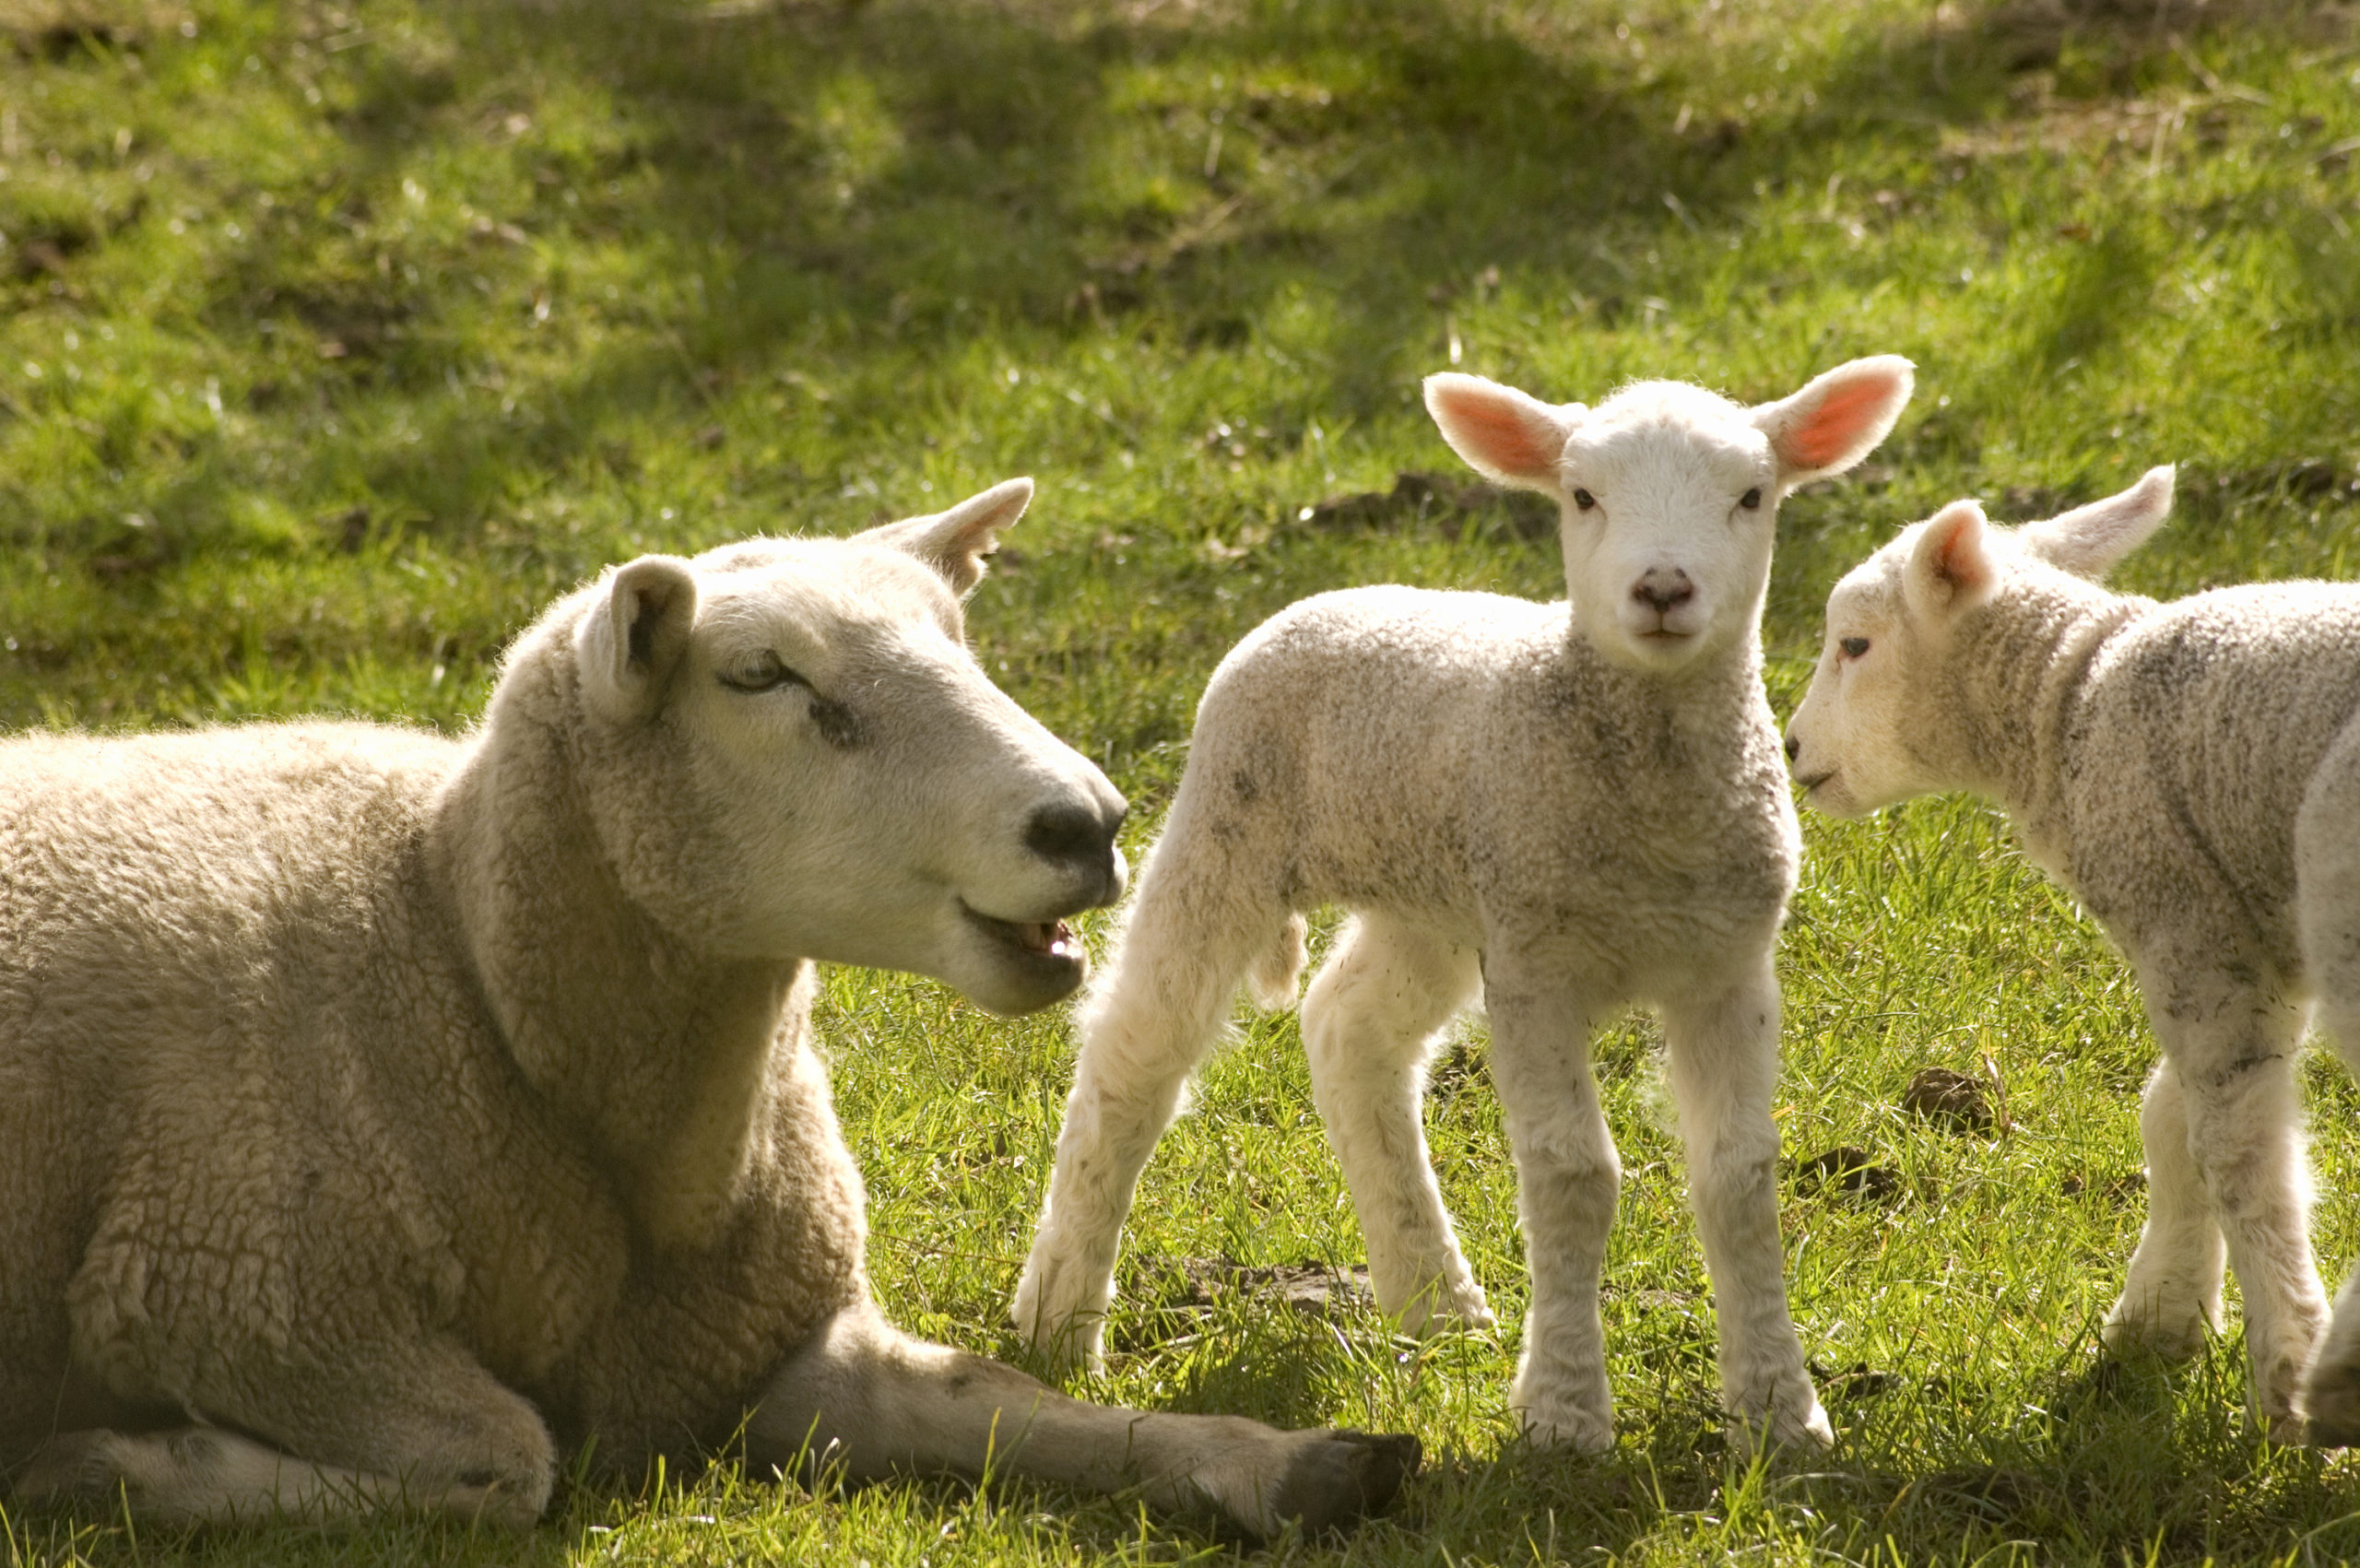 Resistance found for sheep and lambs